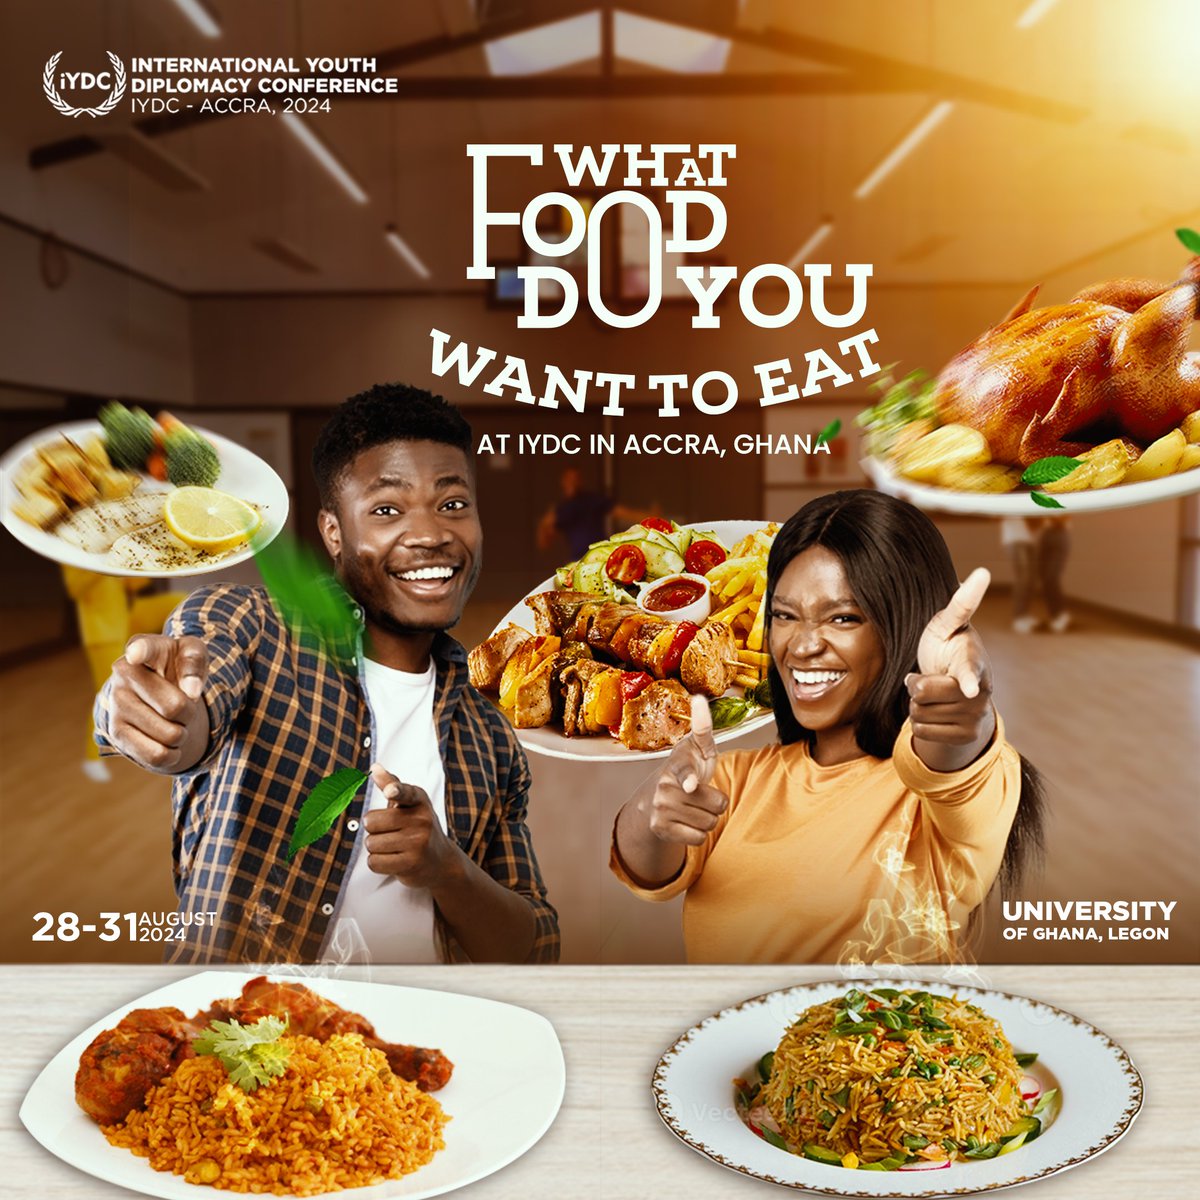 Enjoy delicious food at the Intl' Youth Diplomacy Conference 2024! From global cuisines to local delights, it’s a flavorful journey.
Comment below on the Ghanaian dish you’re excited to try. Bon appétit! 
Register: ifedglobal.org/iydc-registrat…
#DiplomacyDining #TasteOfCulture #ModelUN